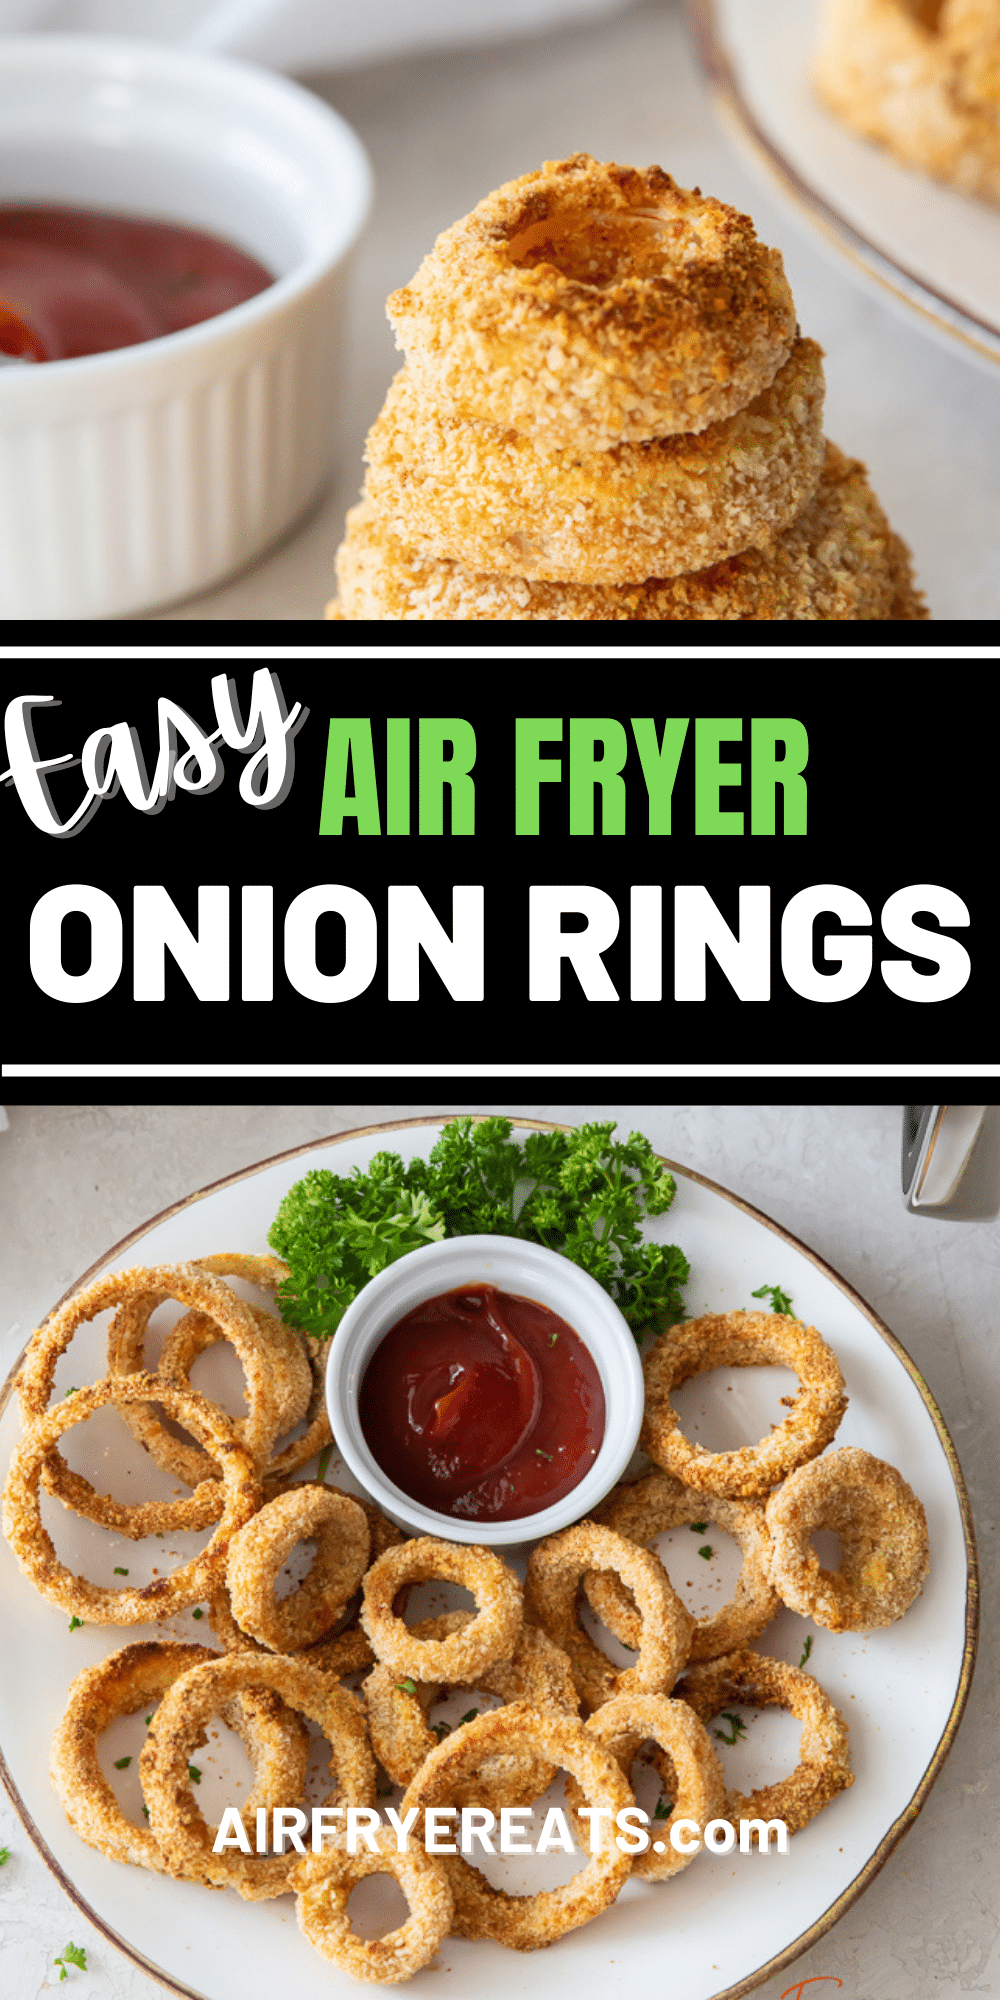 These crispy seasoned onion rings are so easy and quick to make! Enjoy healthier onion rings whenever you like with this simple Air Fryer Onion Rings recipe. #onionrings #airfryeronionrings via @vegetarianmamma